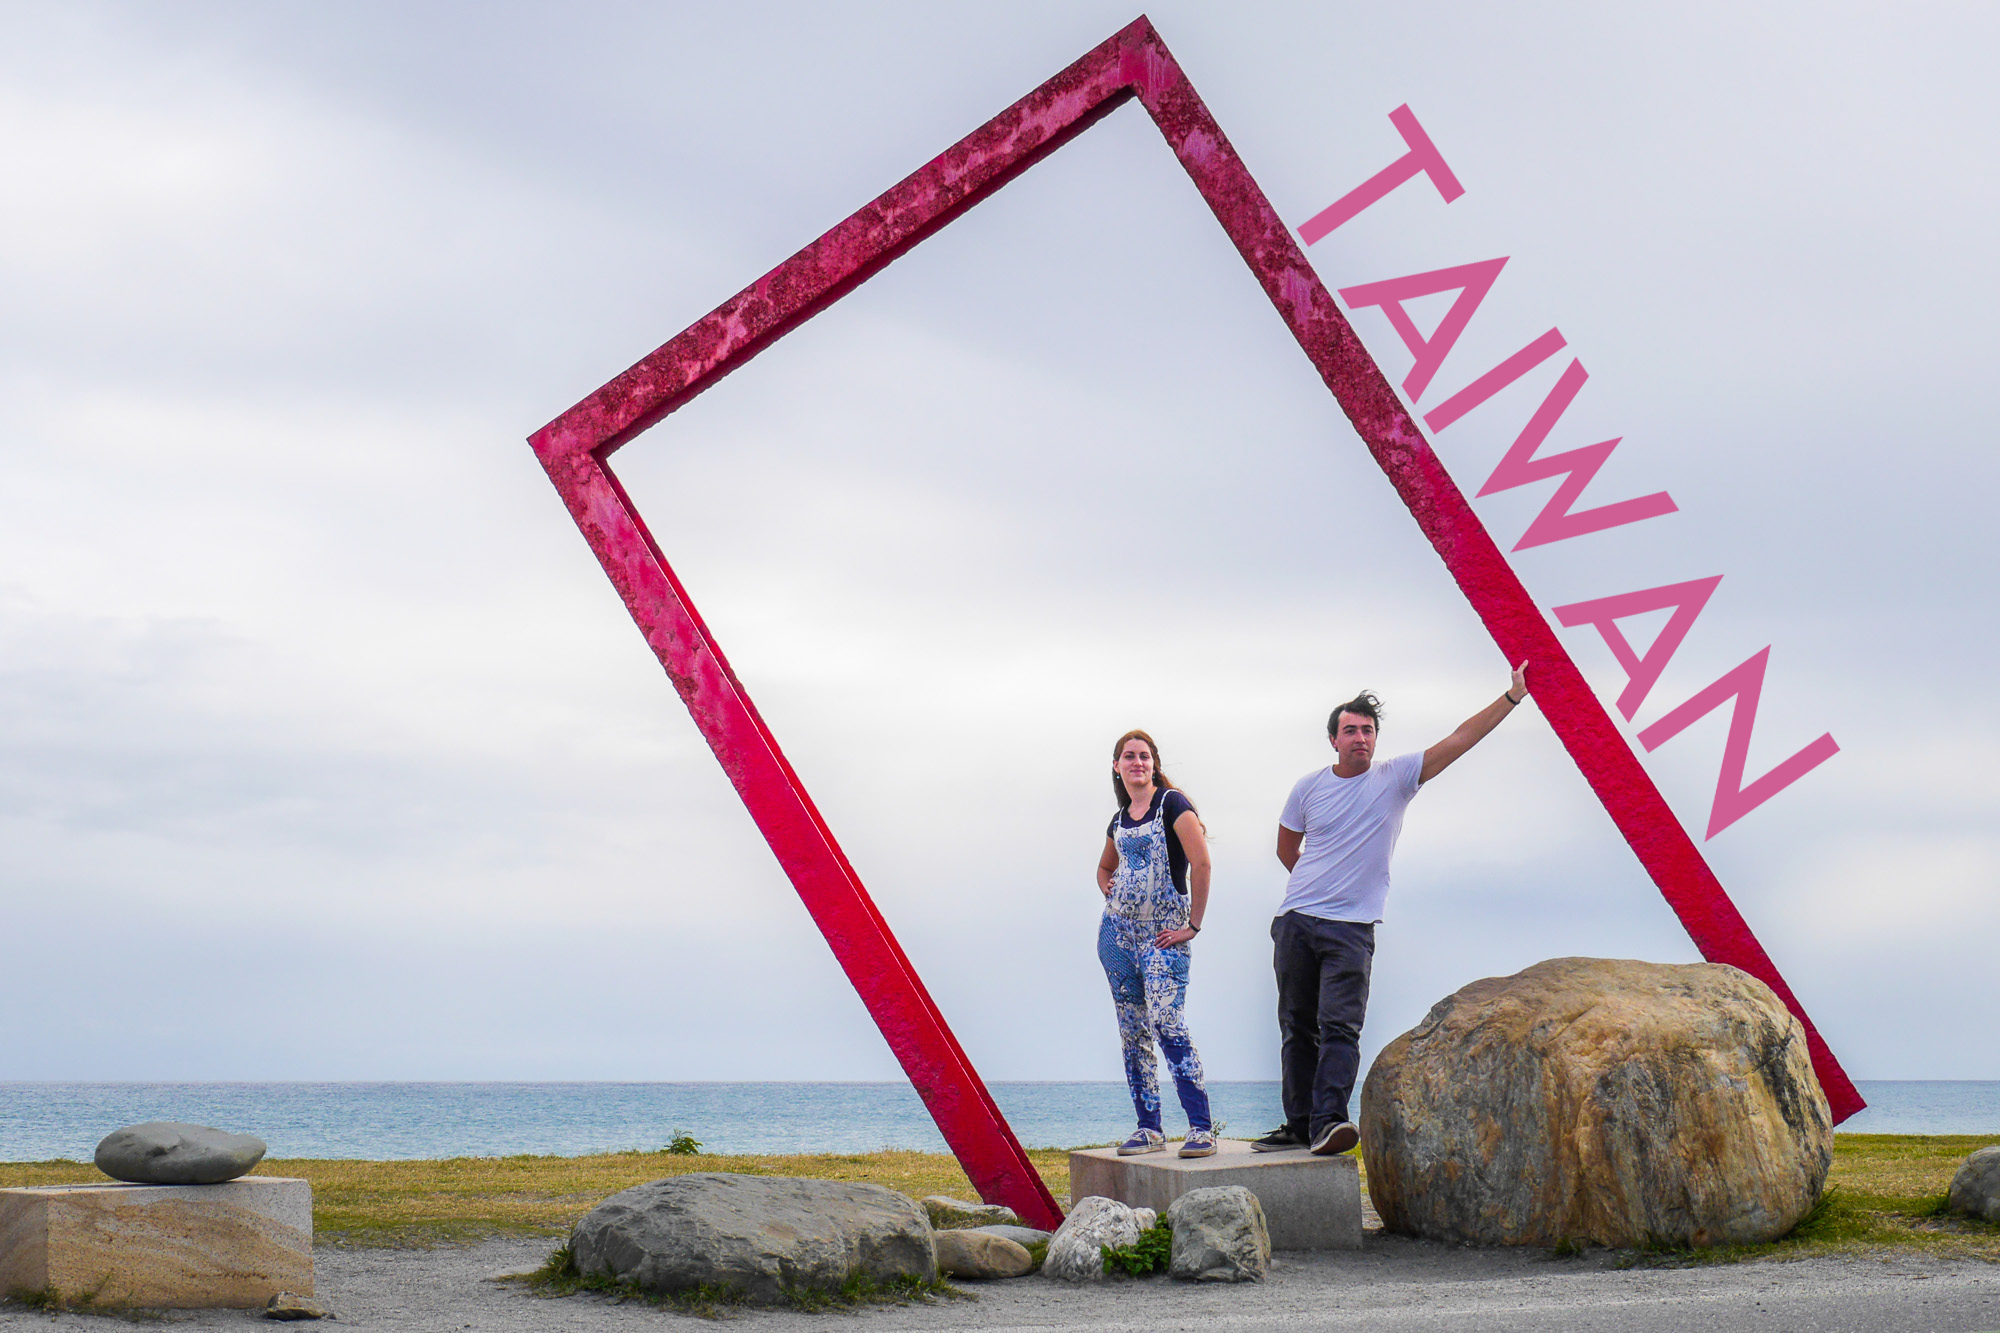 Asian Adventure in Taiwan- Our Journey Around the Taiwanese Island